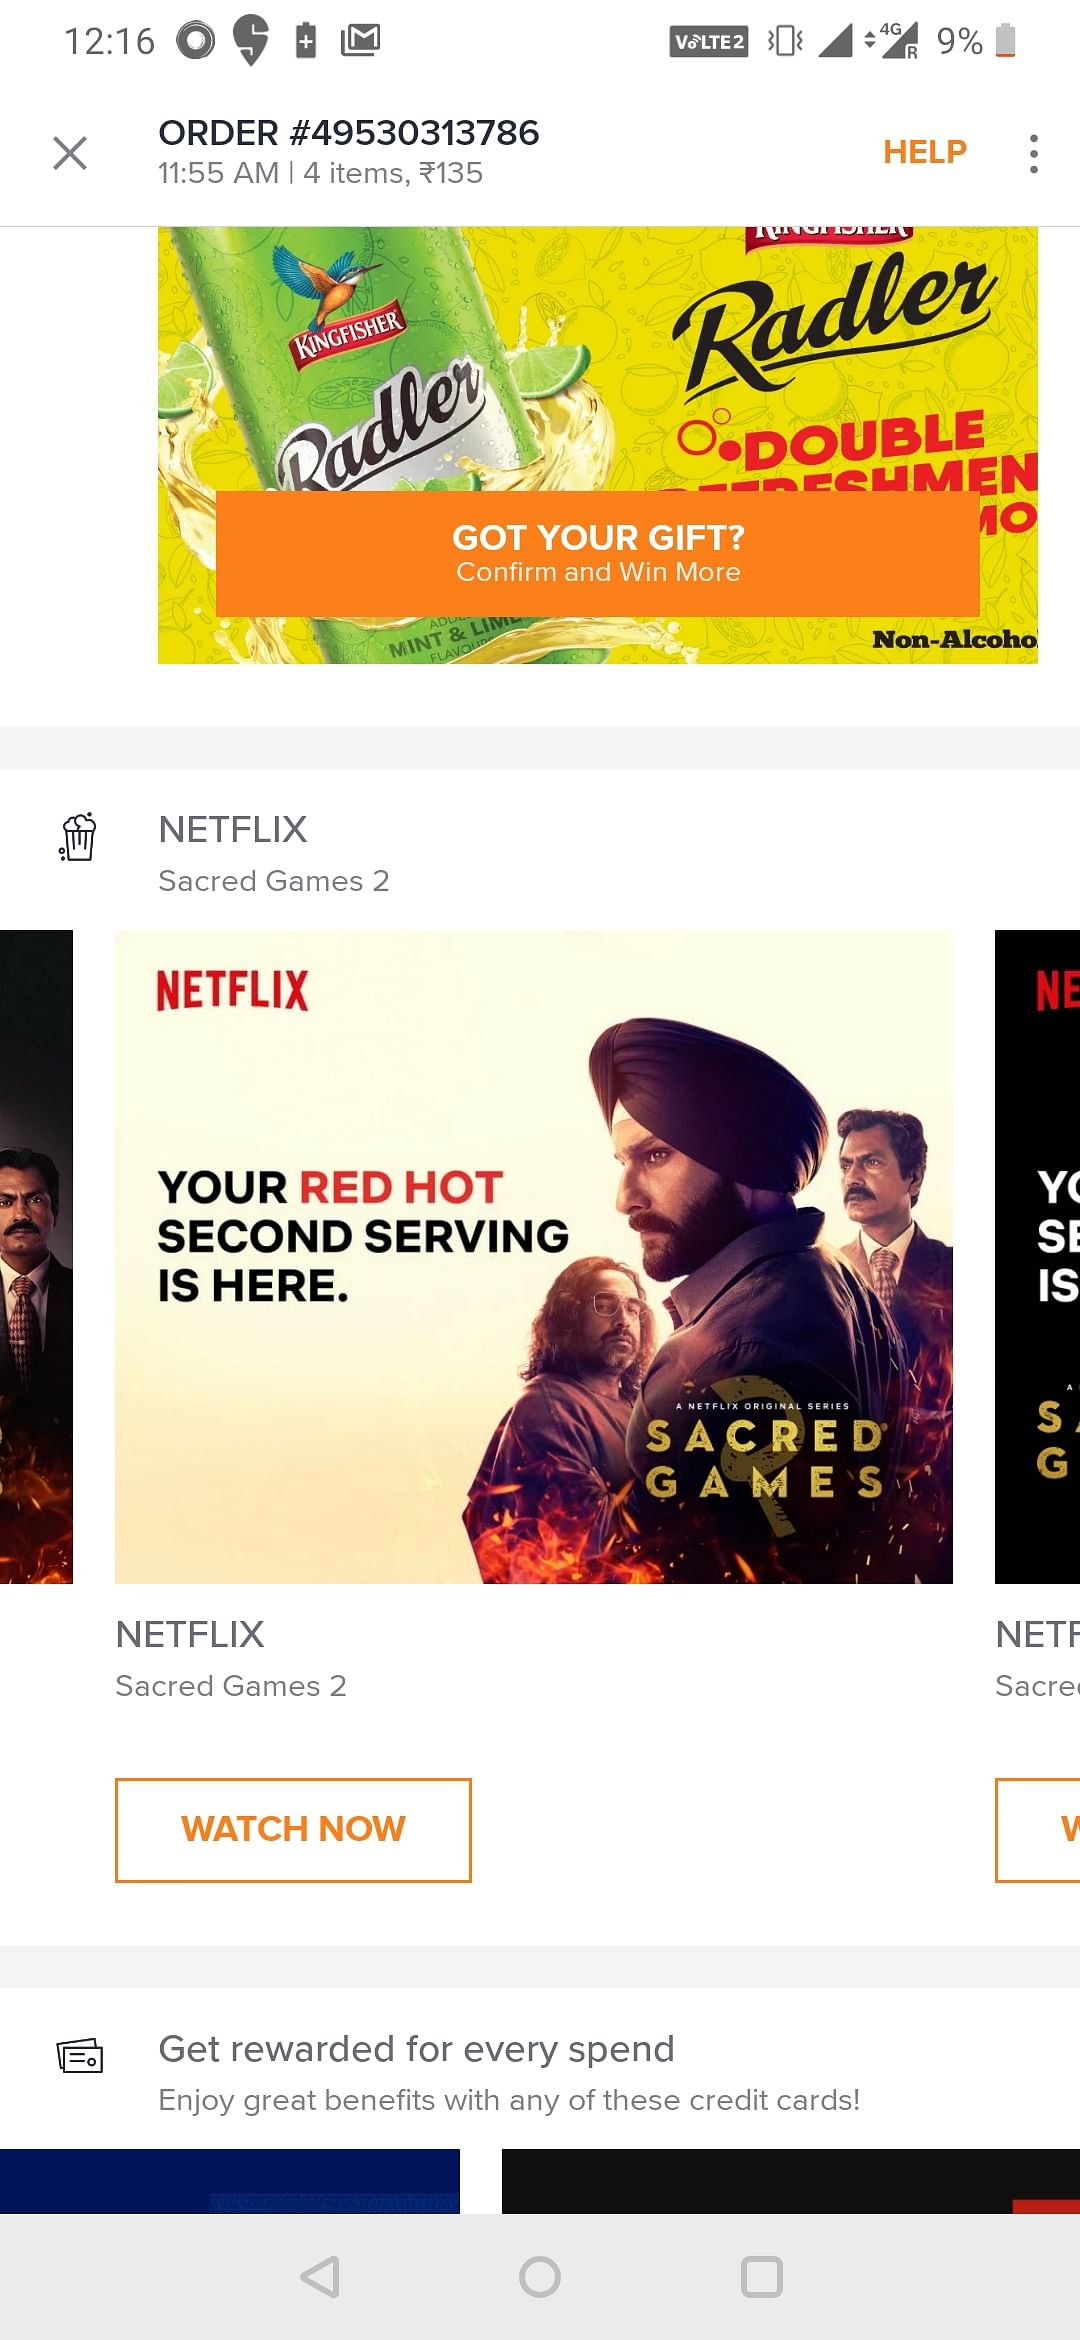 An ad for Netflix's Sacred Games on Swiggy